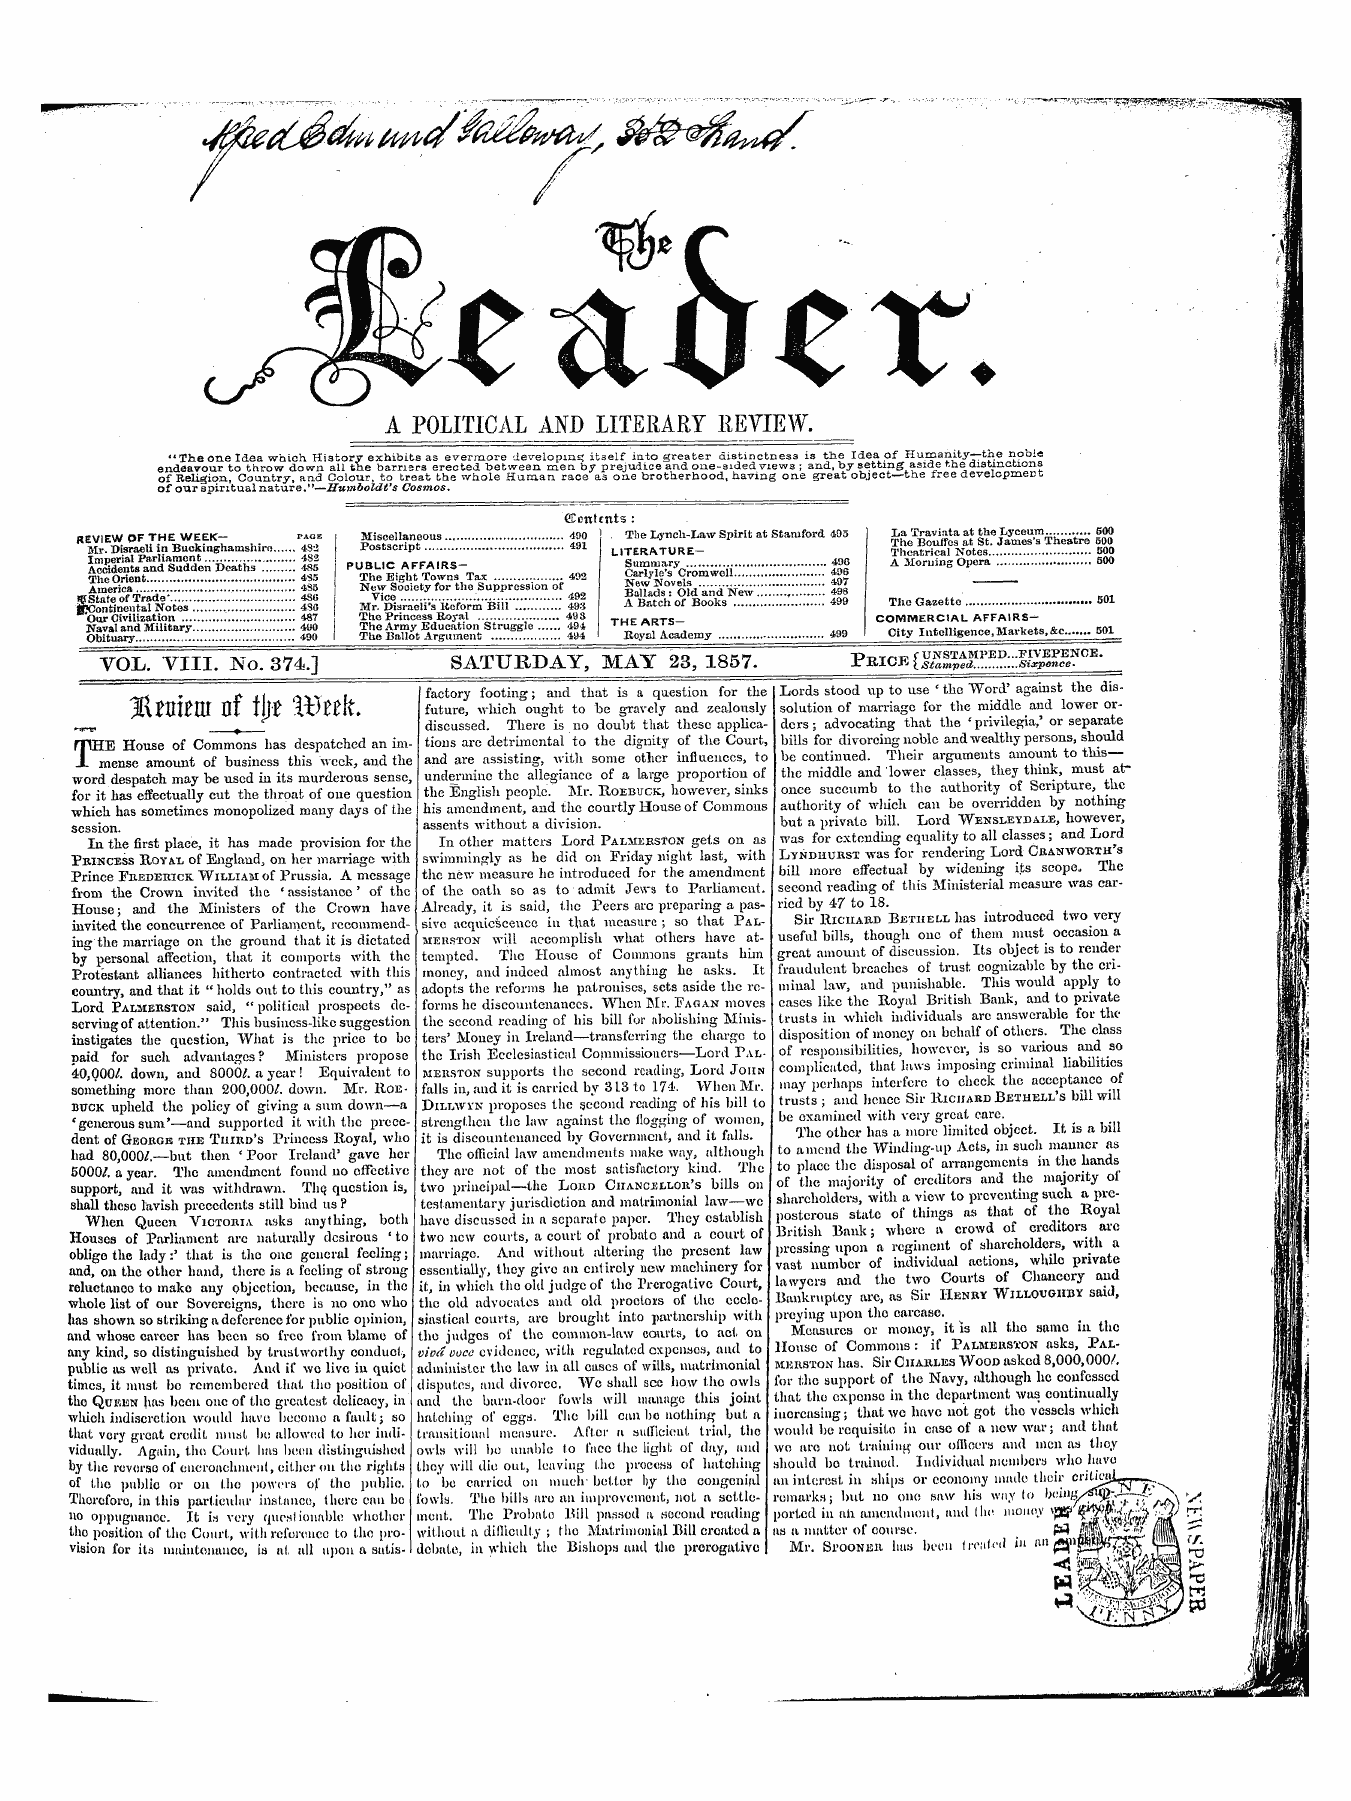 Leader (1850-1860): jS F Y, 1st edition: 1